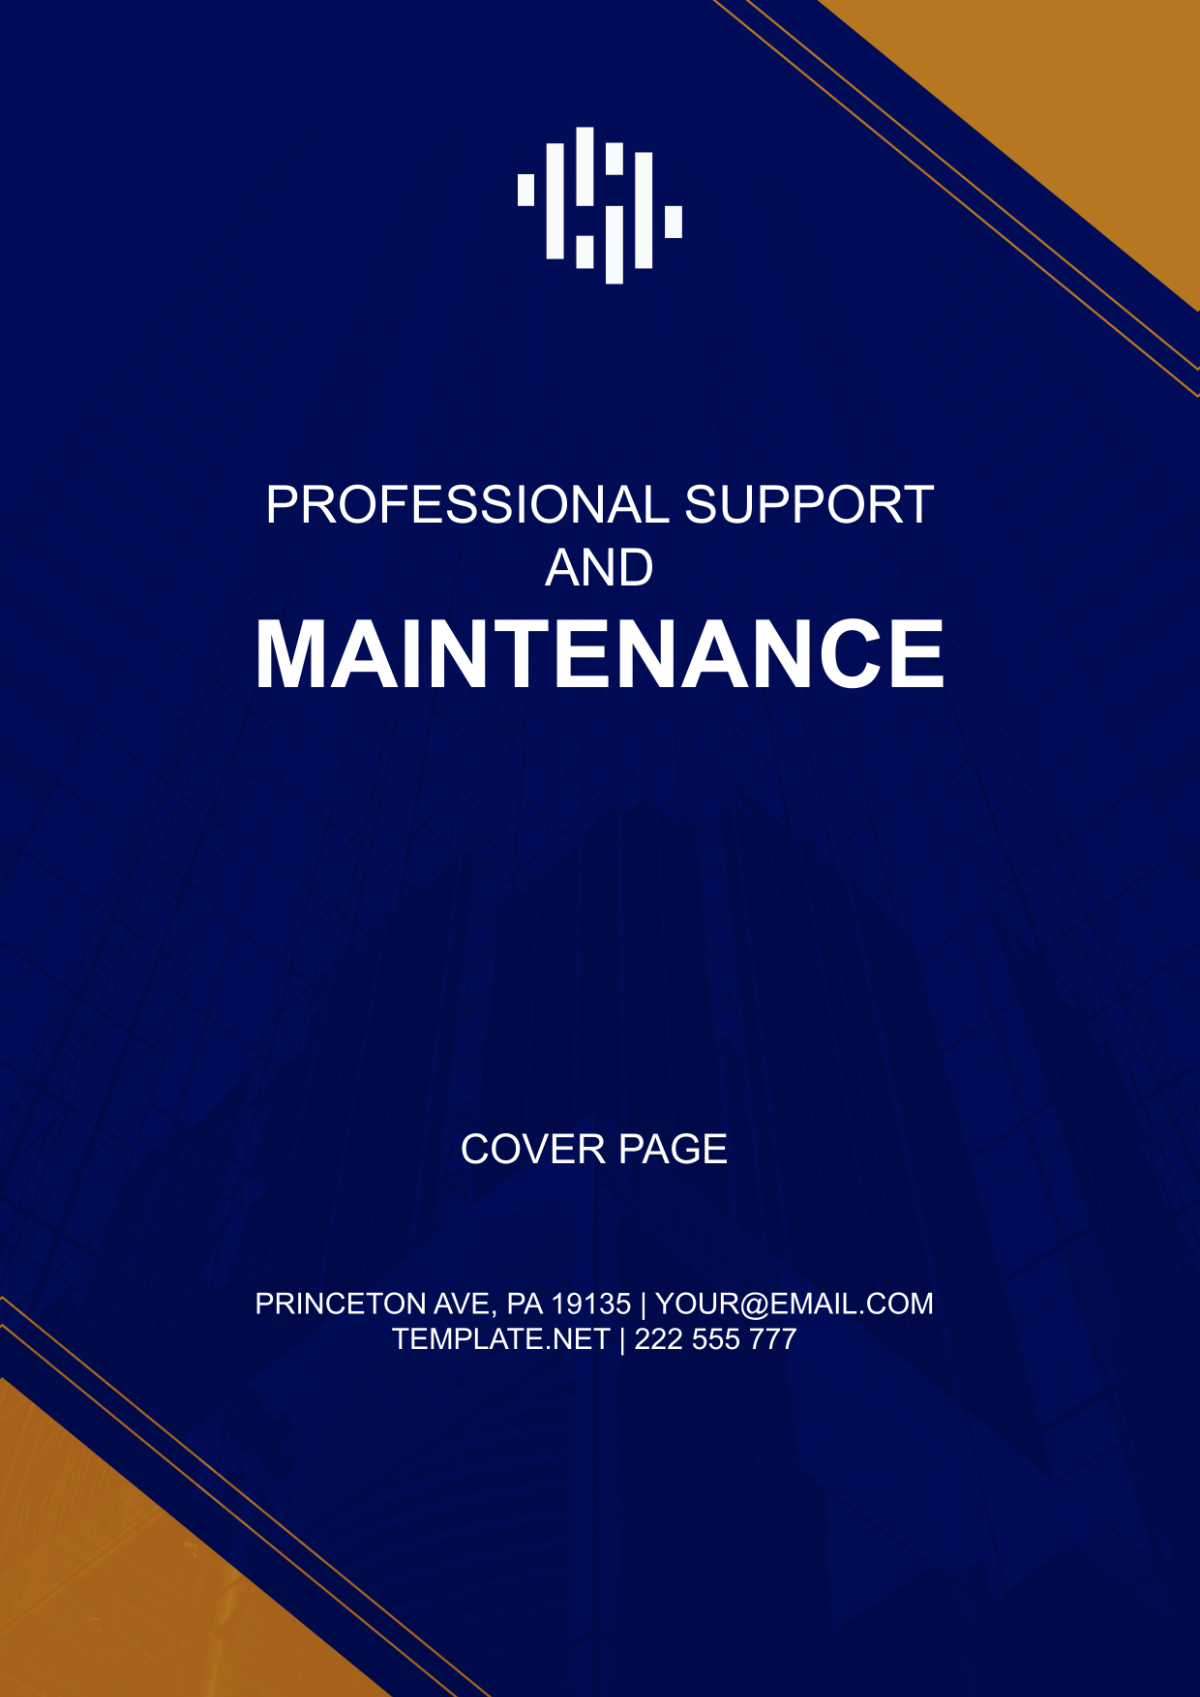 Professional Support and Maintenance Cover Page Template